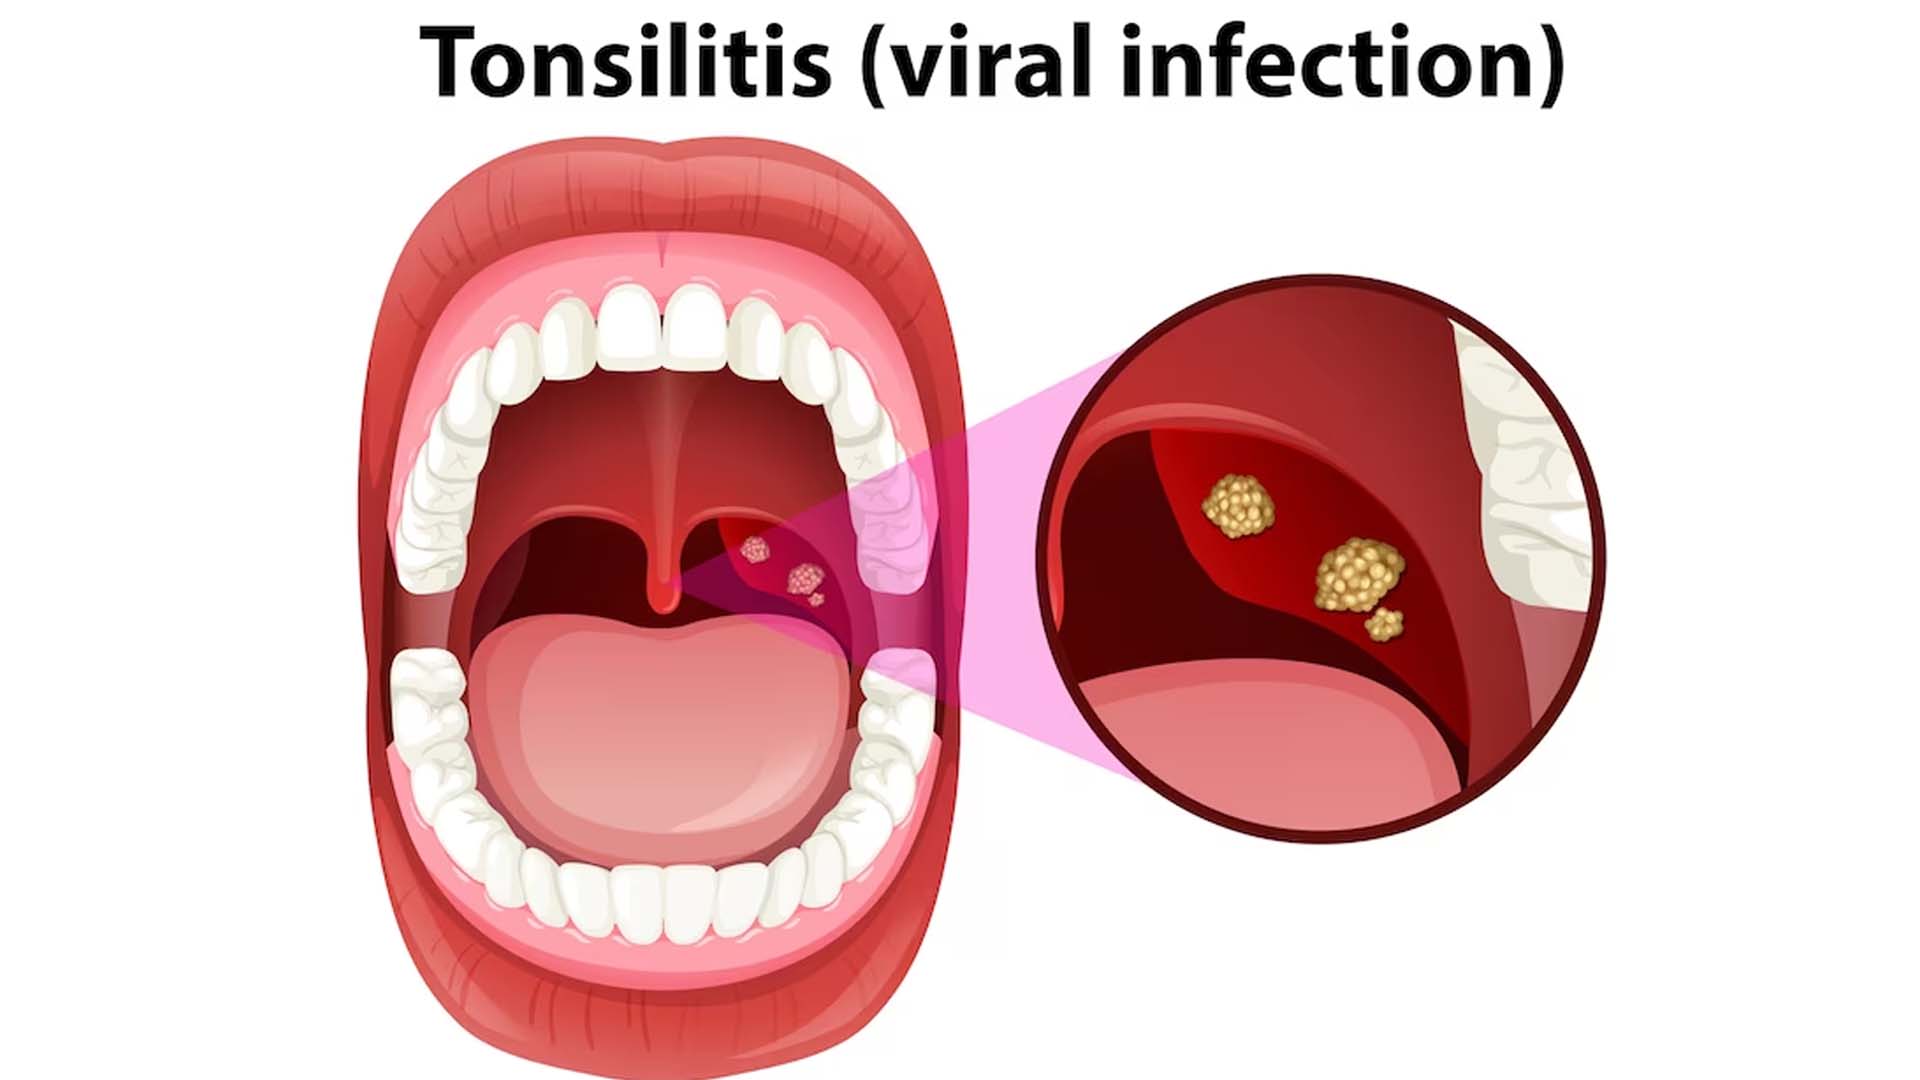 Does Tonsillitis Cause Fever?